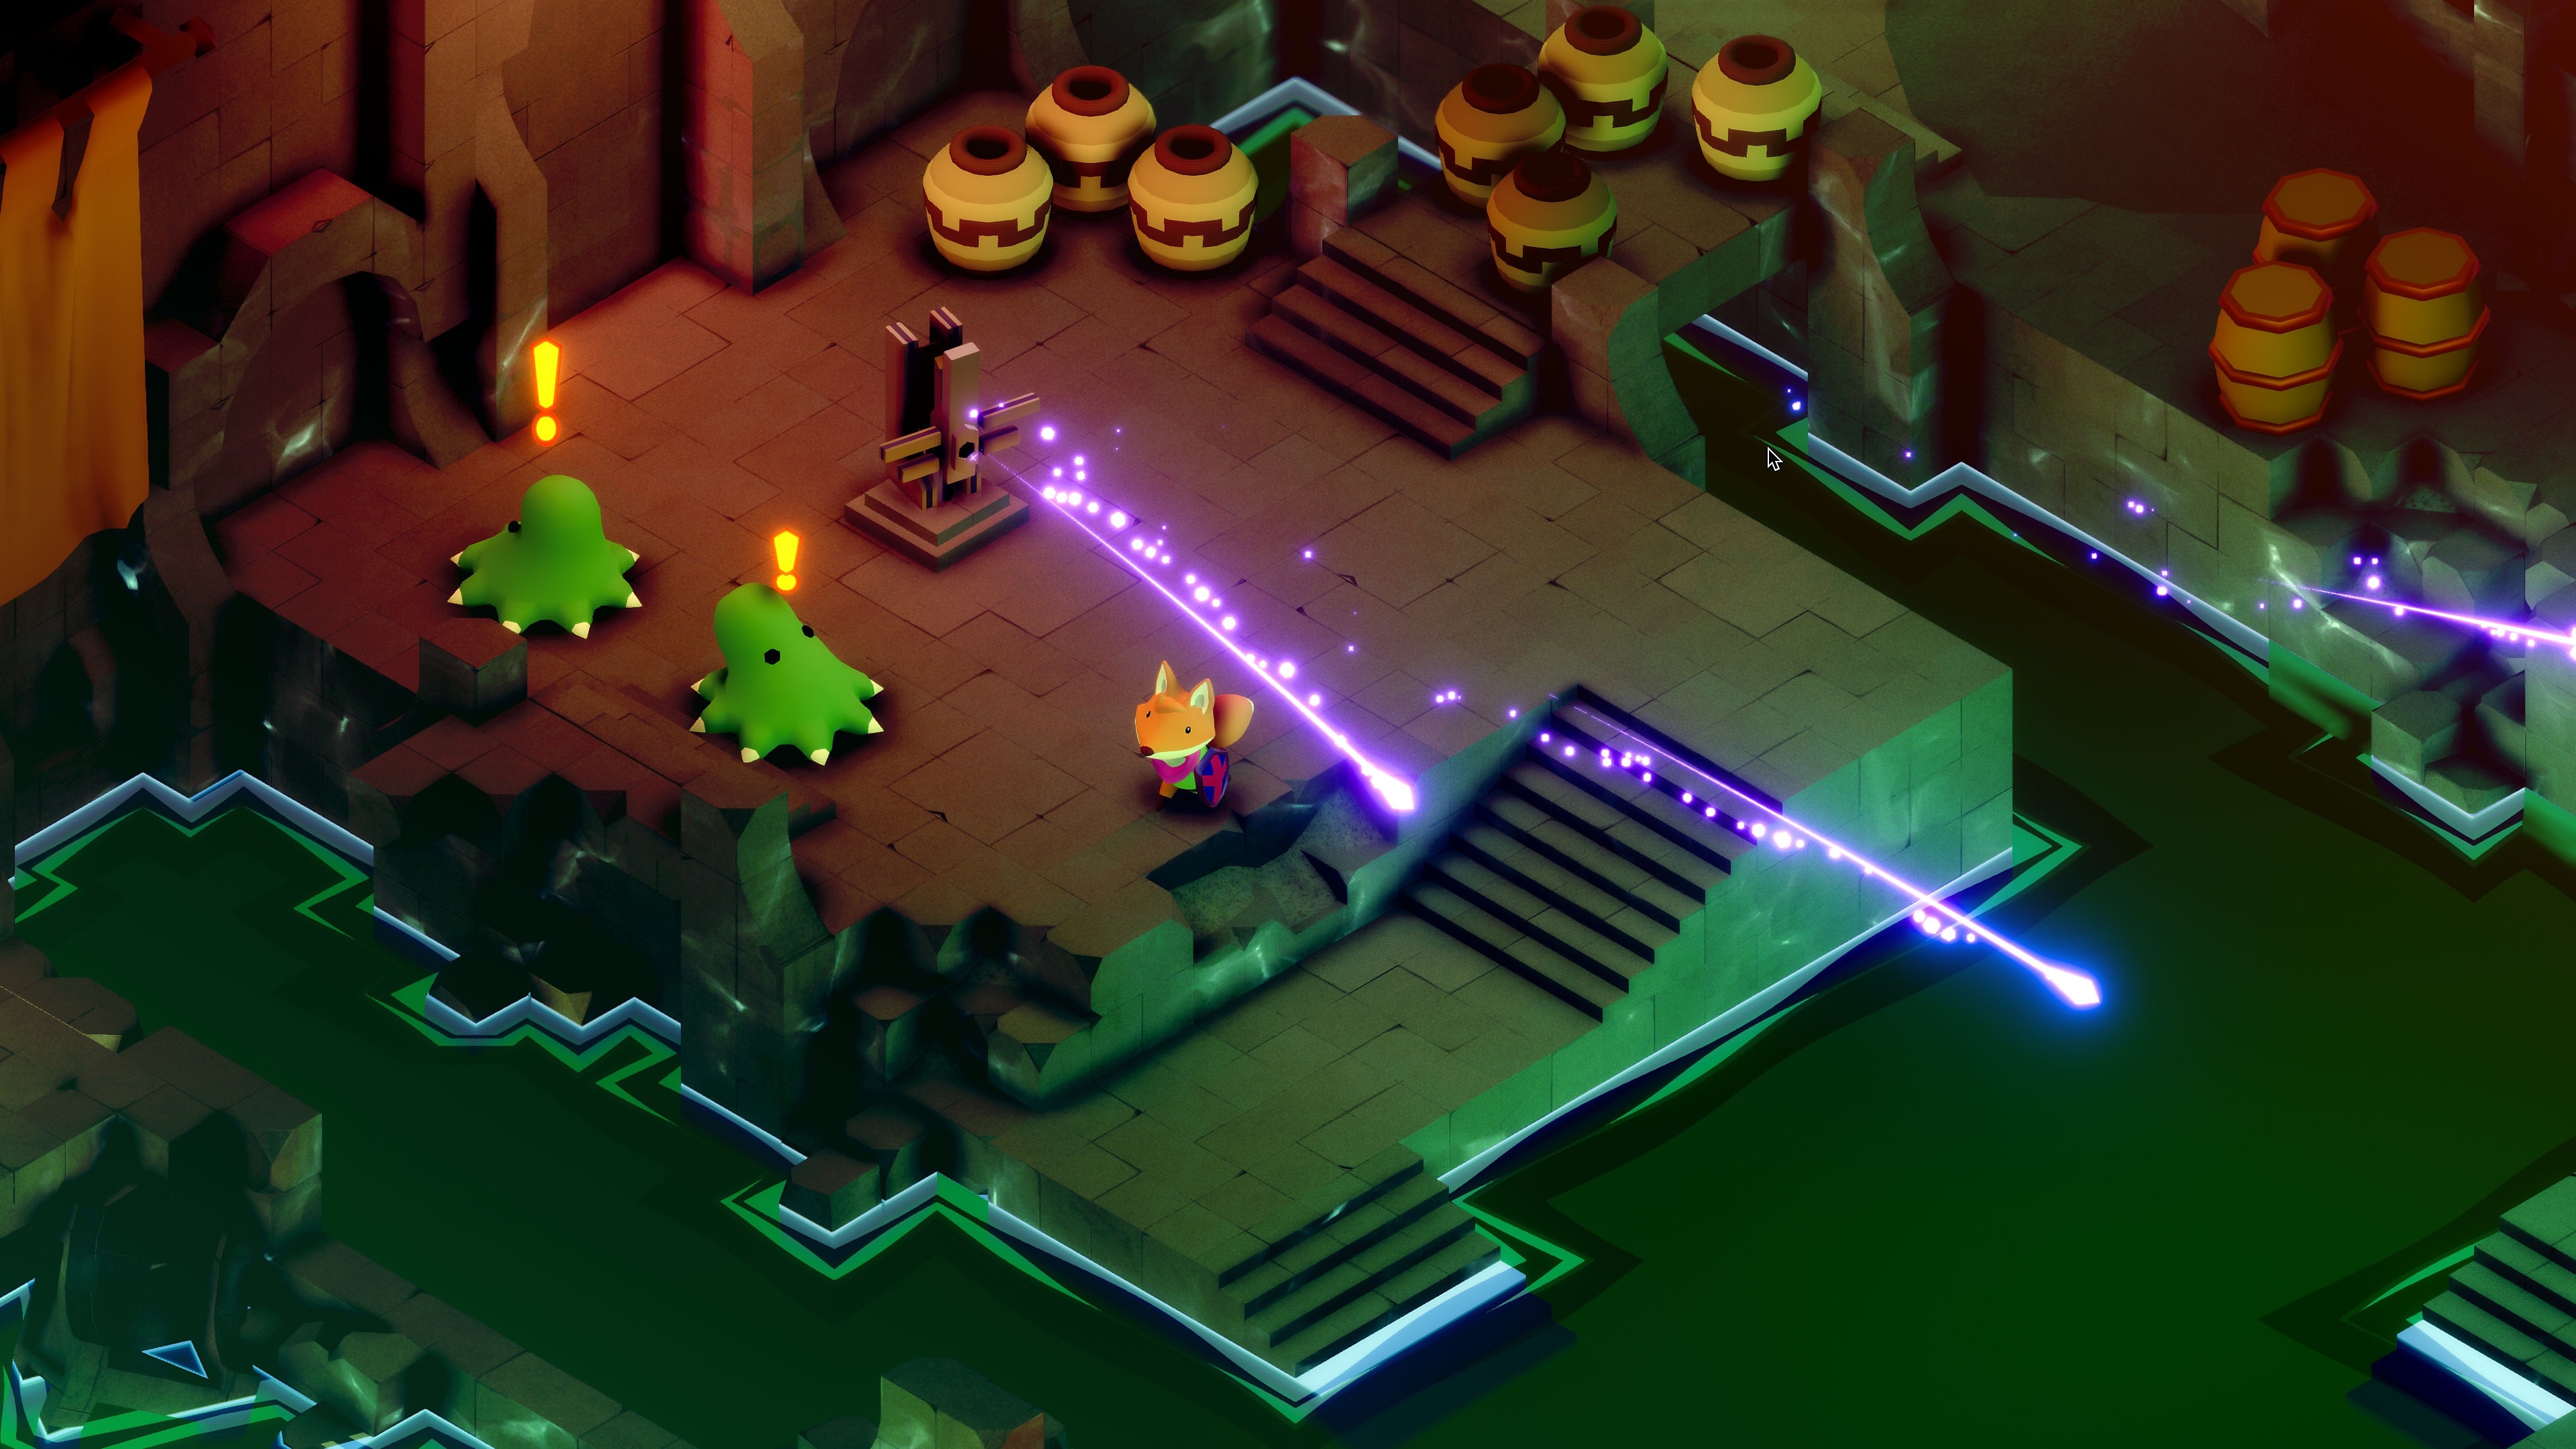 Tunic screenshot showing combat with green octopus style enemies